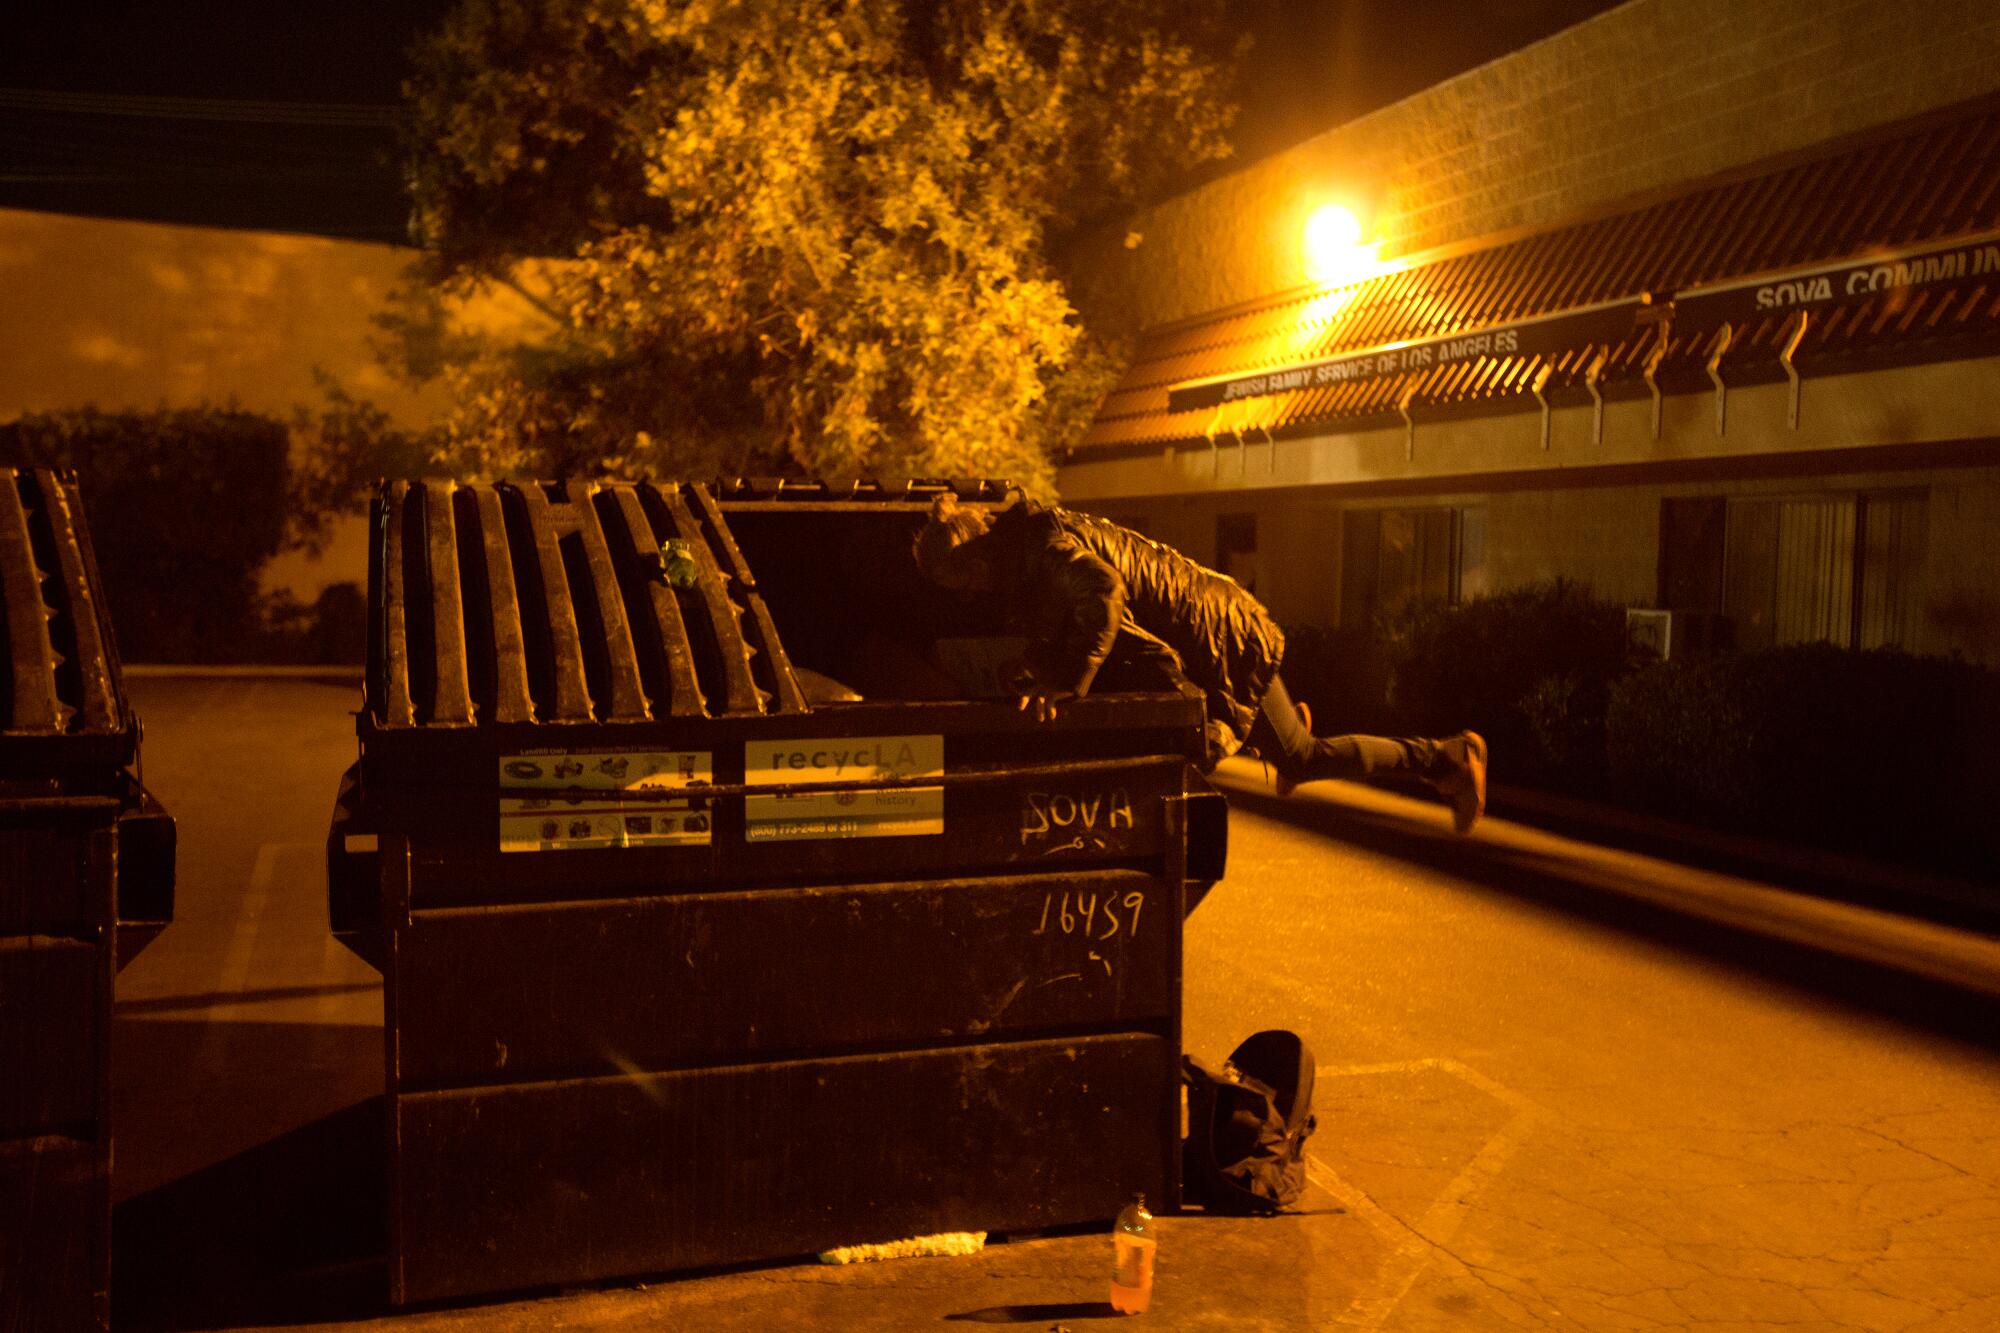 Elizabeth Bolton looks for food in a dumpster in Van Nuys in April 2019.